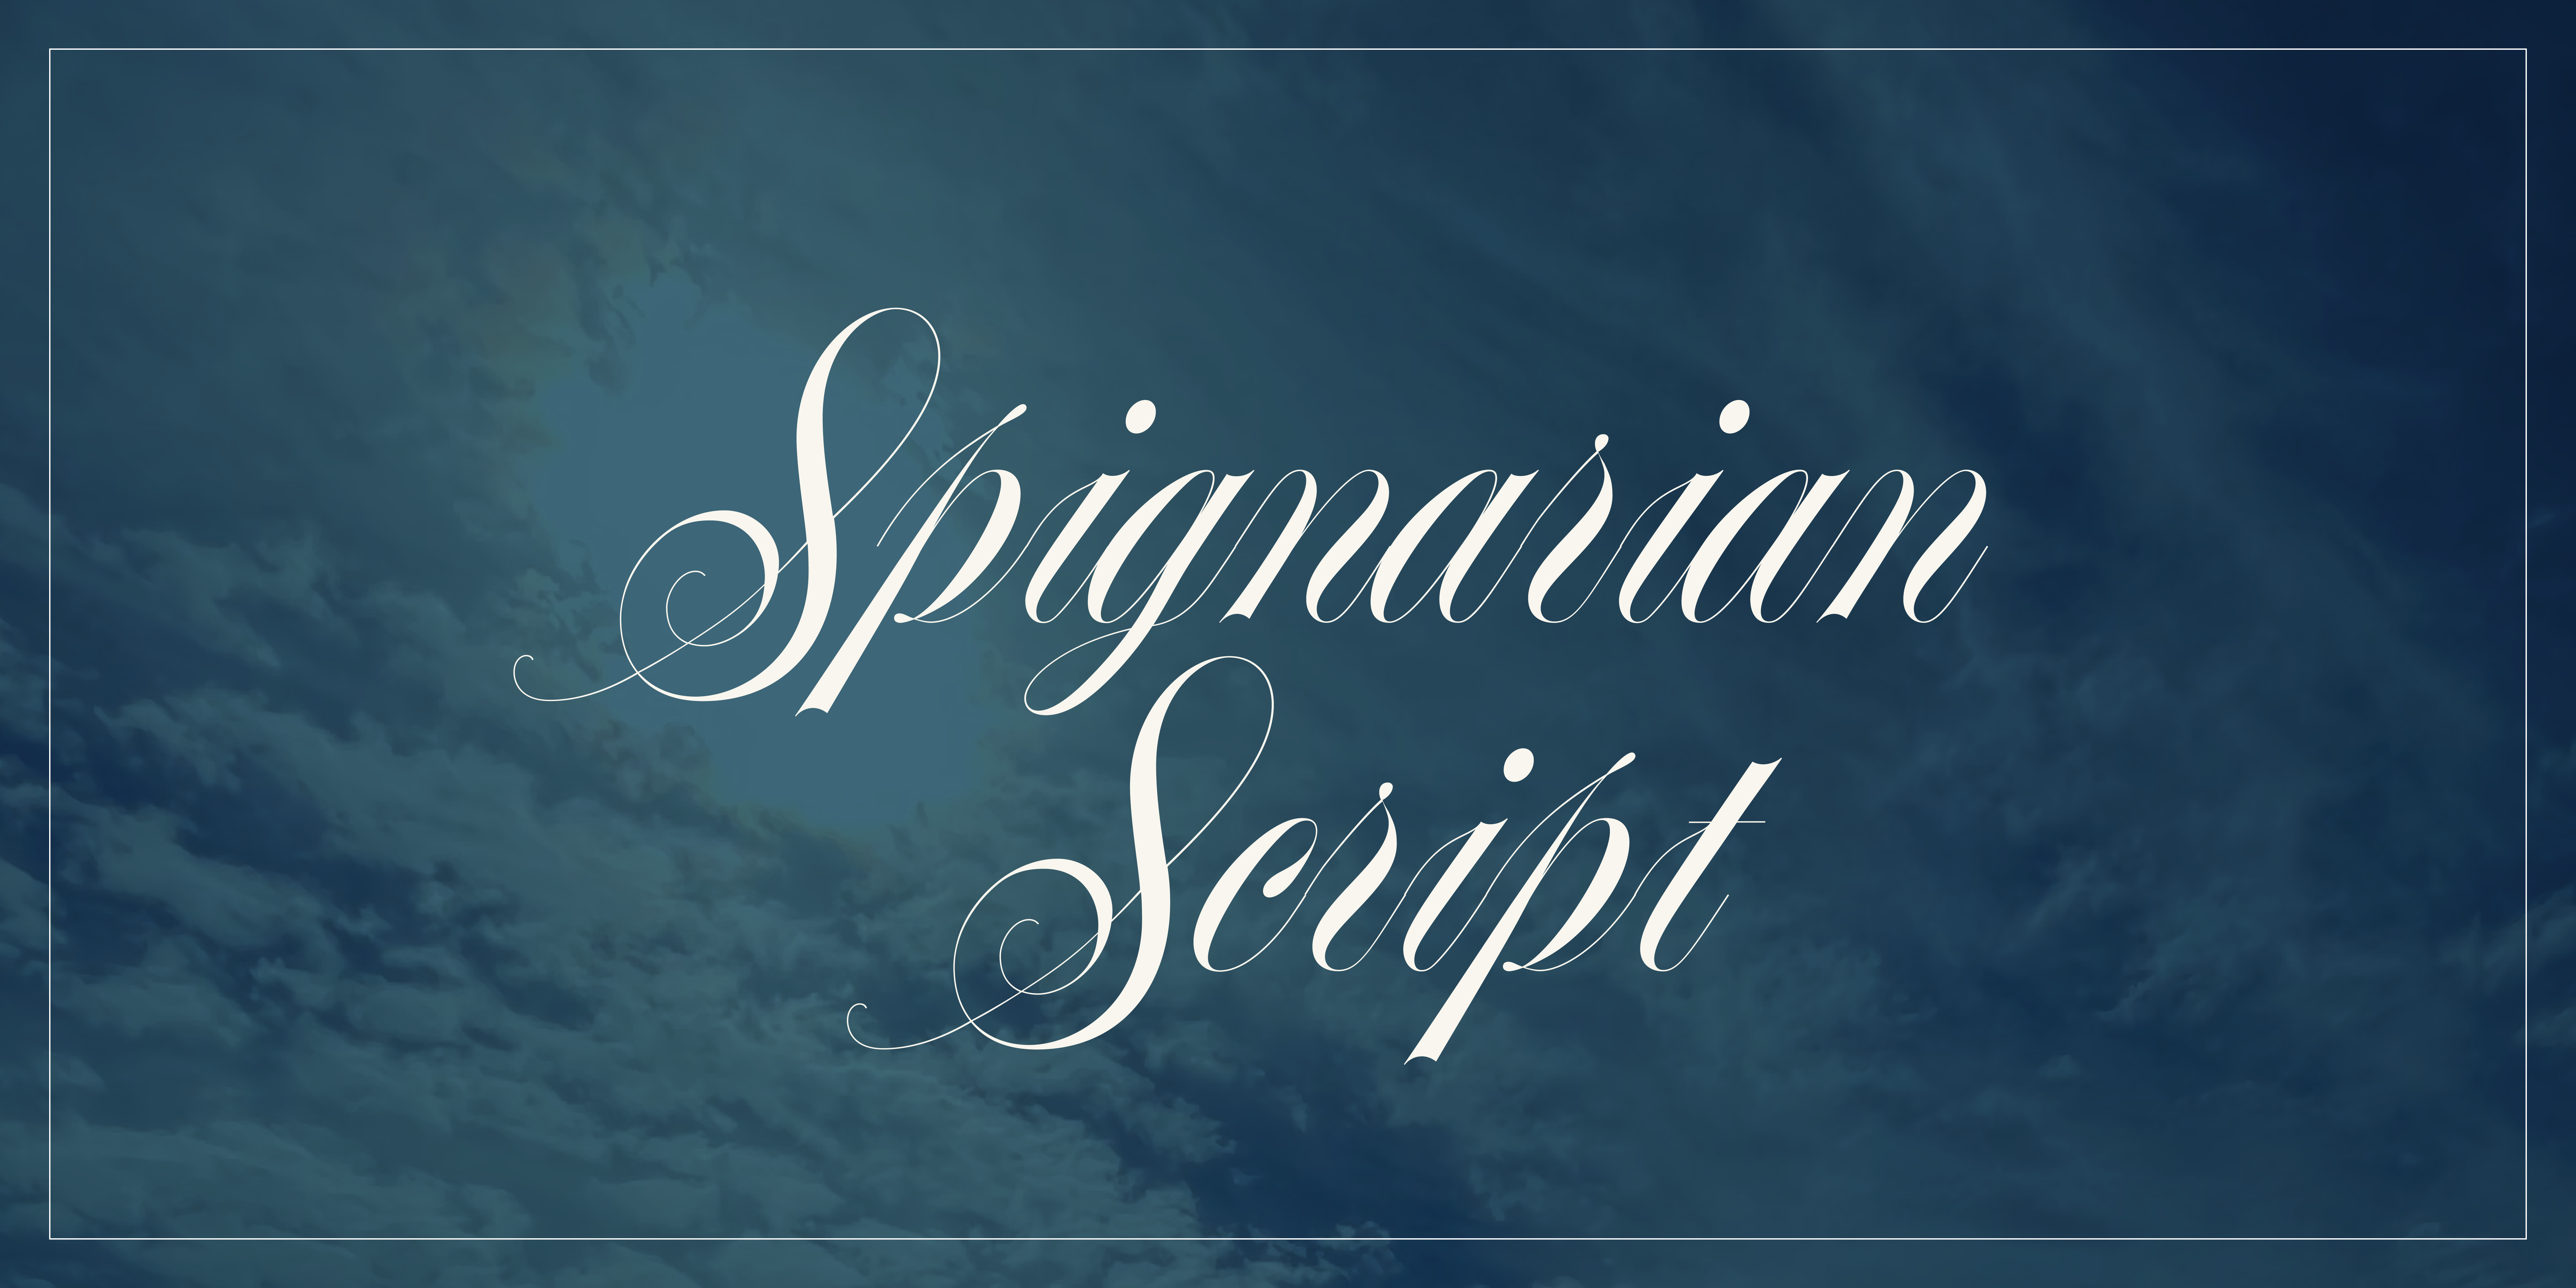 Card displaying Spignarian Script typeface in various styles